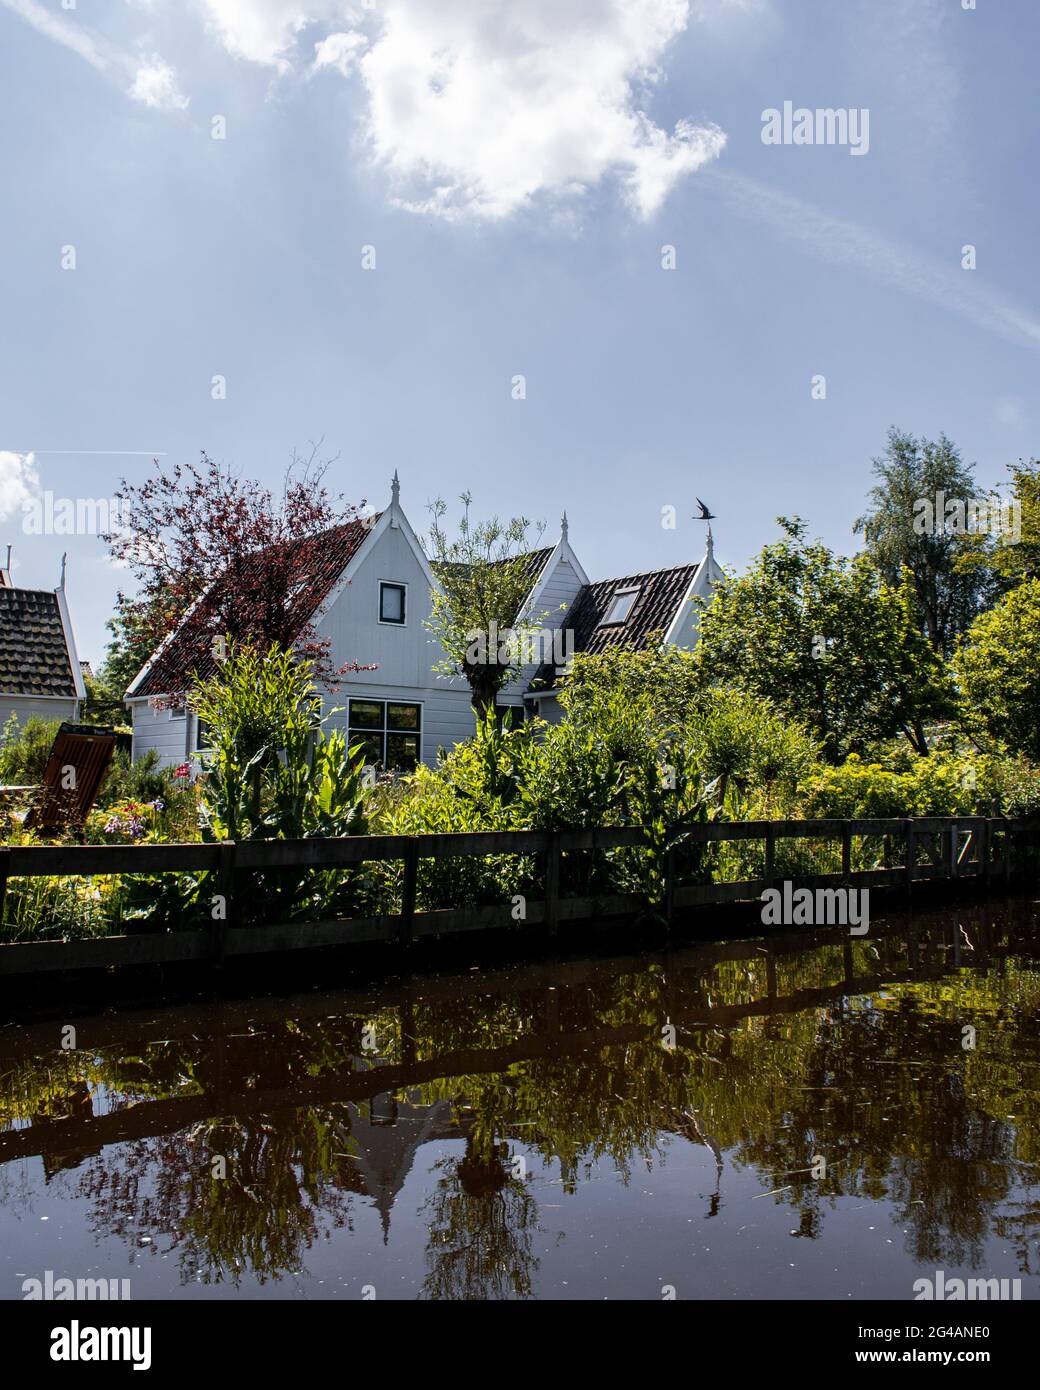 Boat tour through Broek in Waterland, a typical Dutch village in the Netherlands Stock Photo